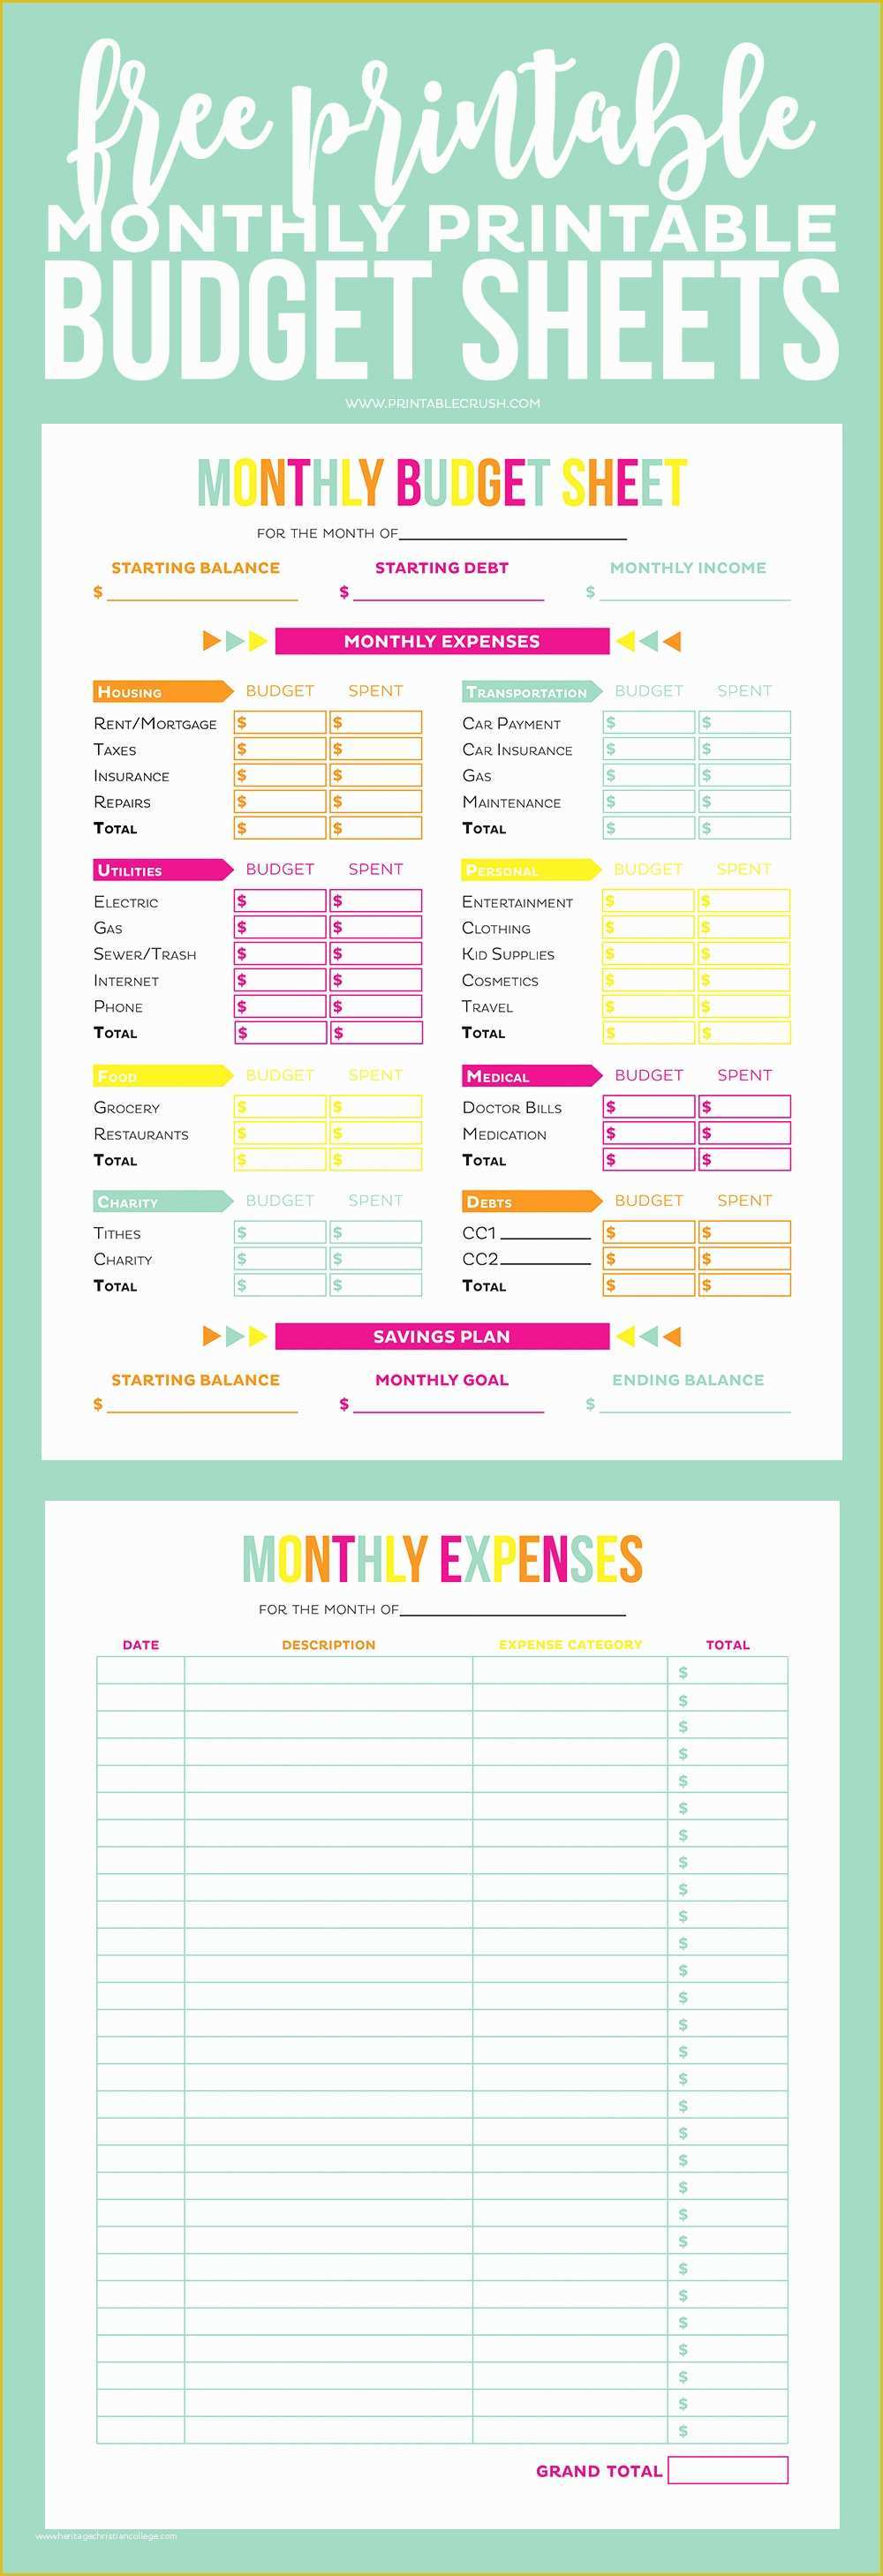 Free Printable Weekly Budget Template Of Free Printable Monthly Bud Sheets 7 Best Images Of